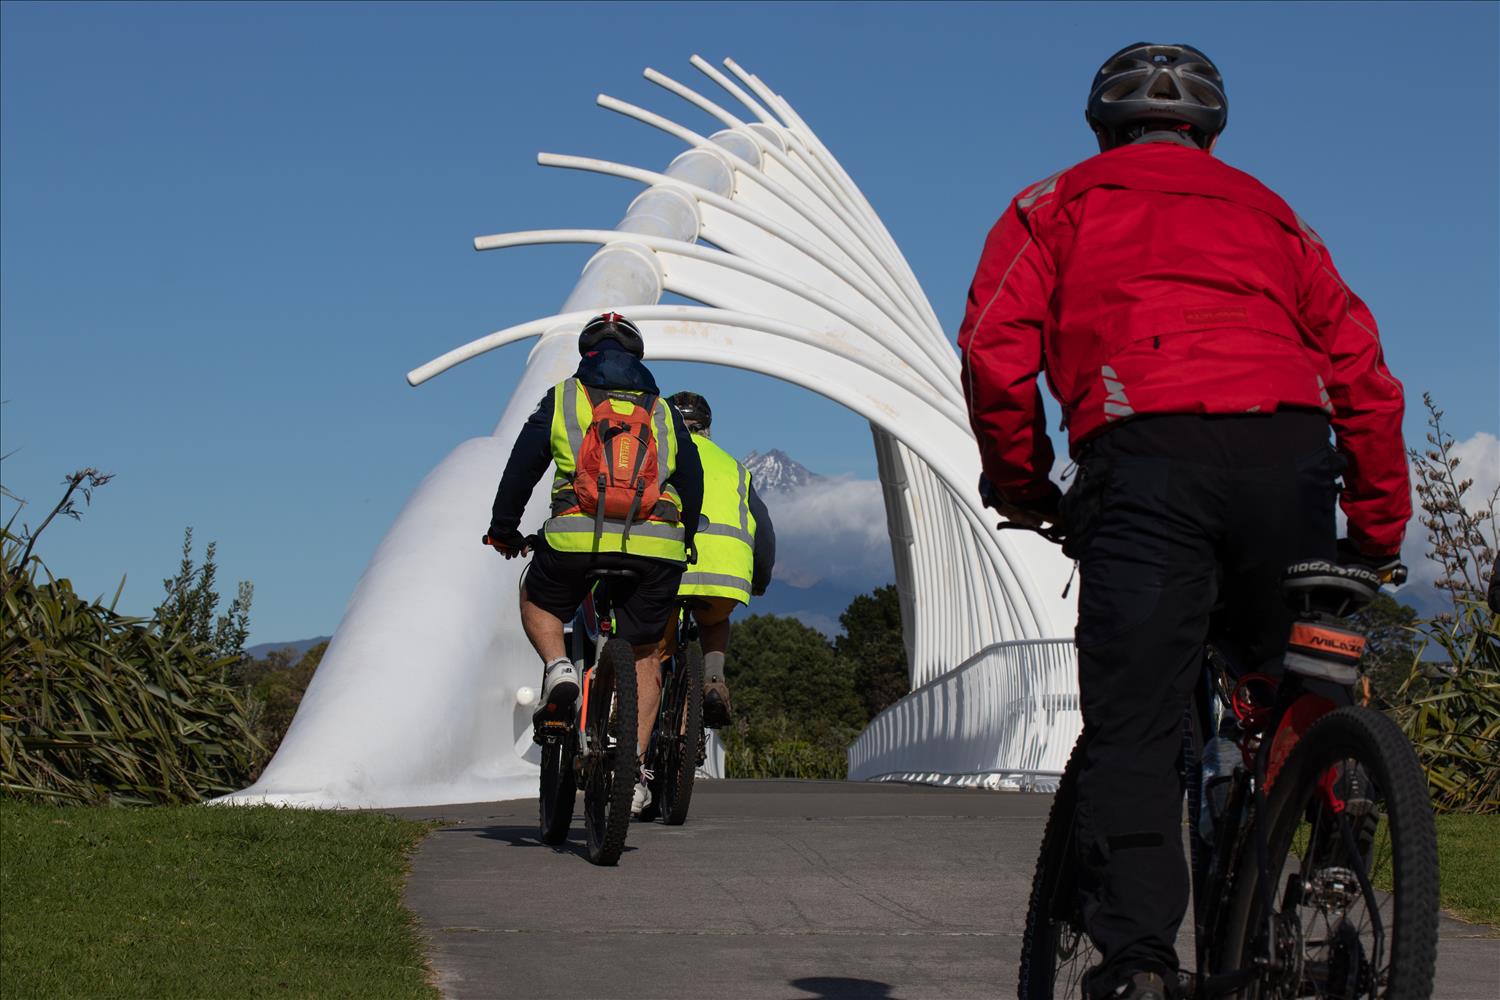 Don't Believe The Backlash  The Benefits Of NZ Investing More In Cycling Will Far Outweigh The Costs